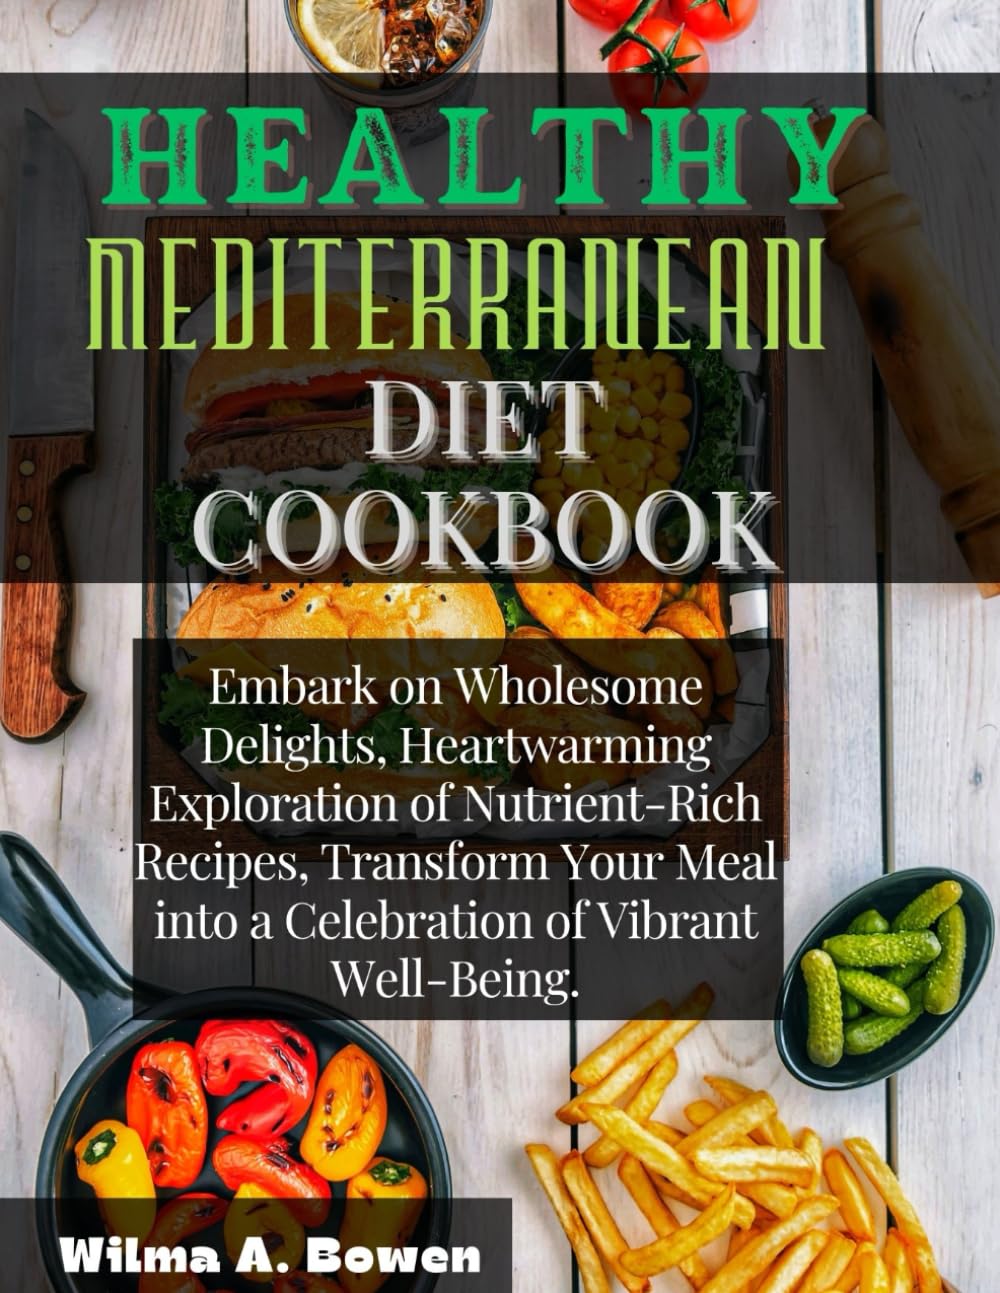 HEALTHY MEDITERRANEAN DIET COOKBOOK: Embark on Wholesome Delights, Heartwarming Exploration of Nutrient-Rich Recipes, Transform Your Meal into a Celebration of Vibrant Well-Being.